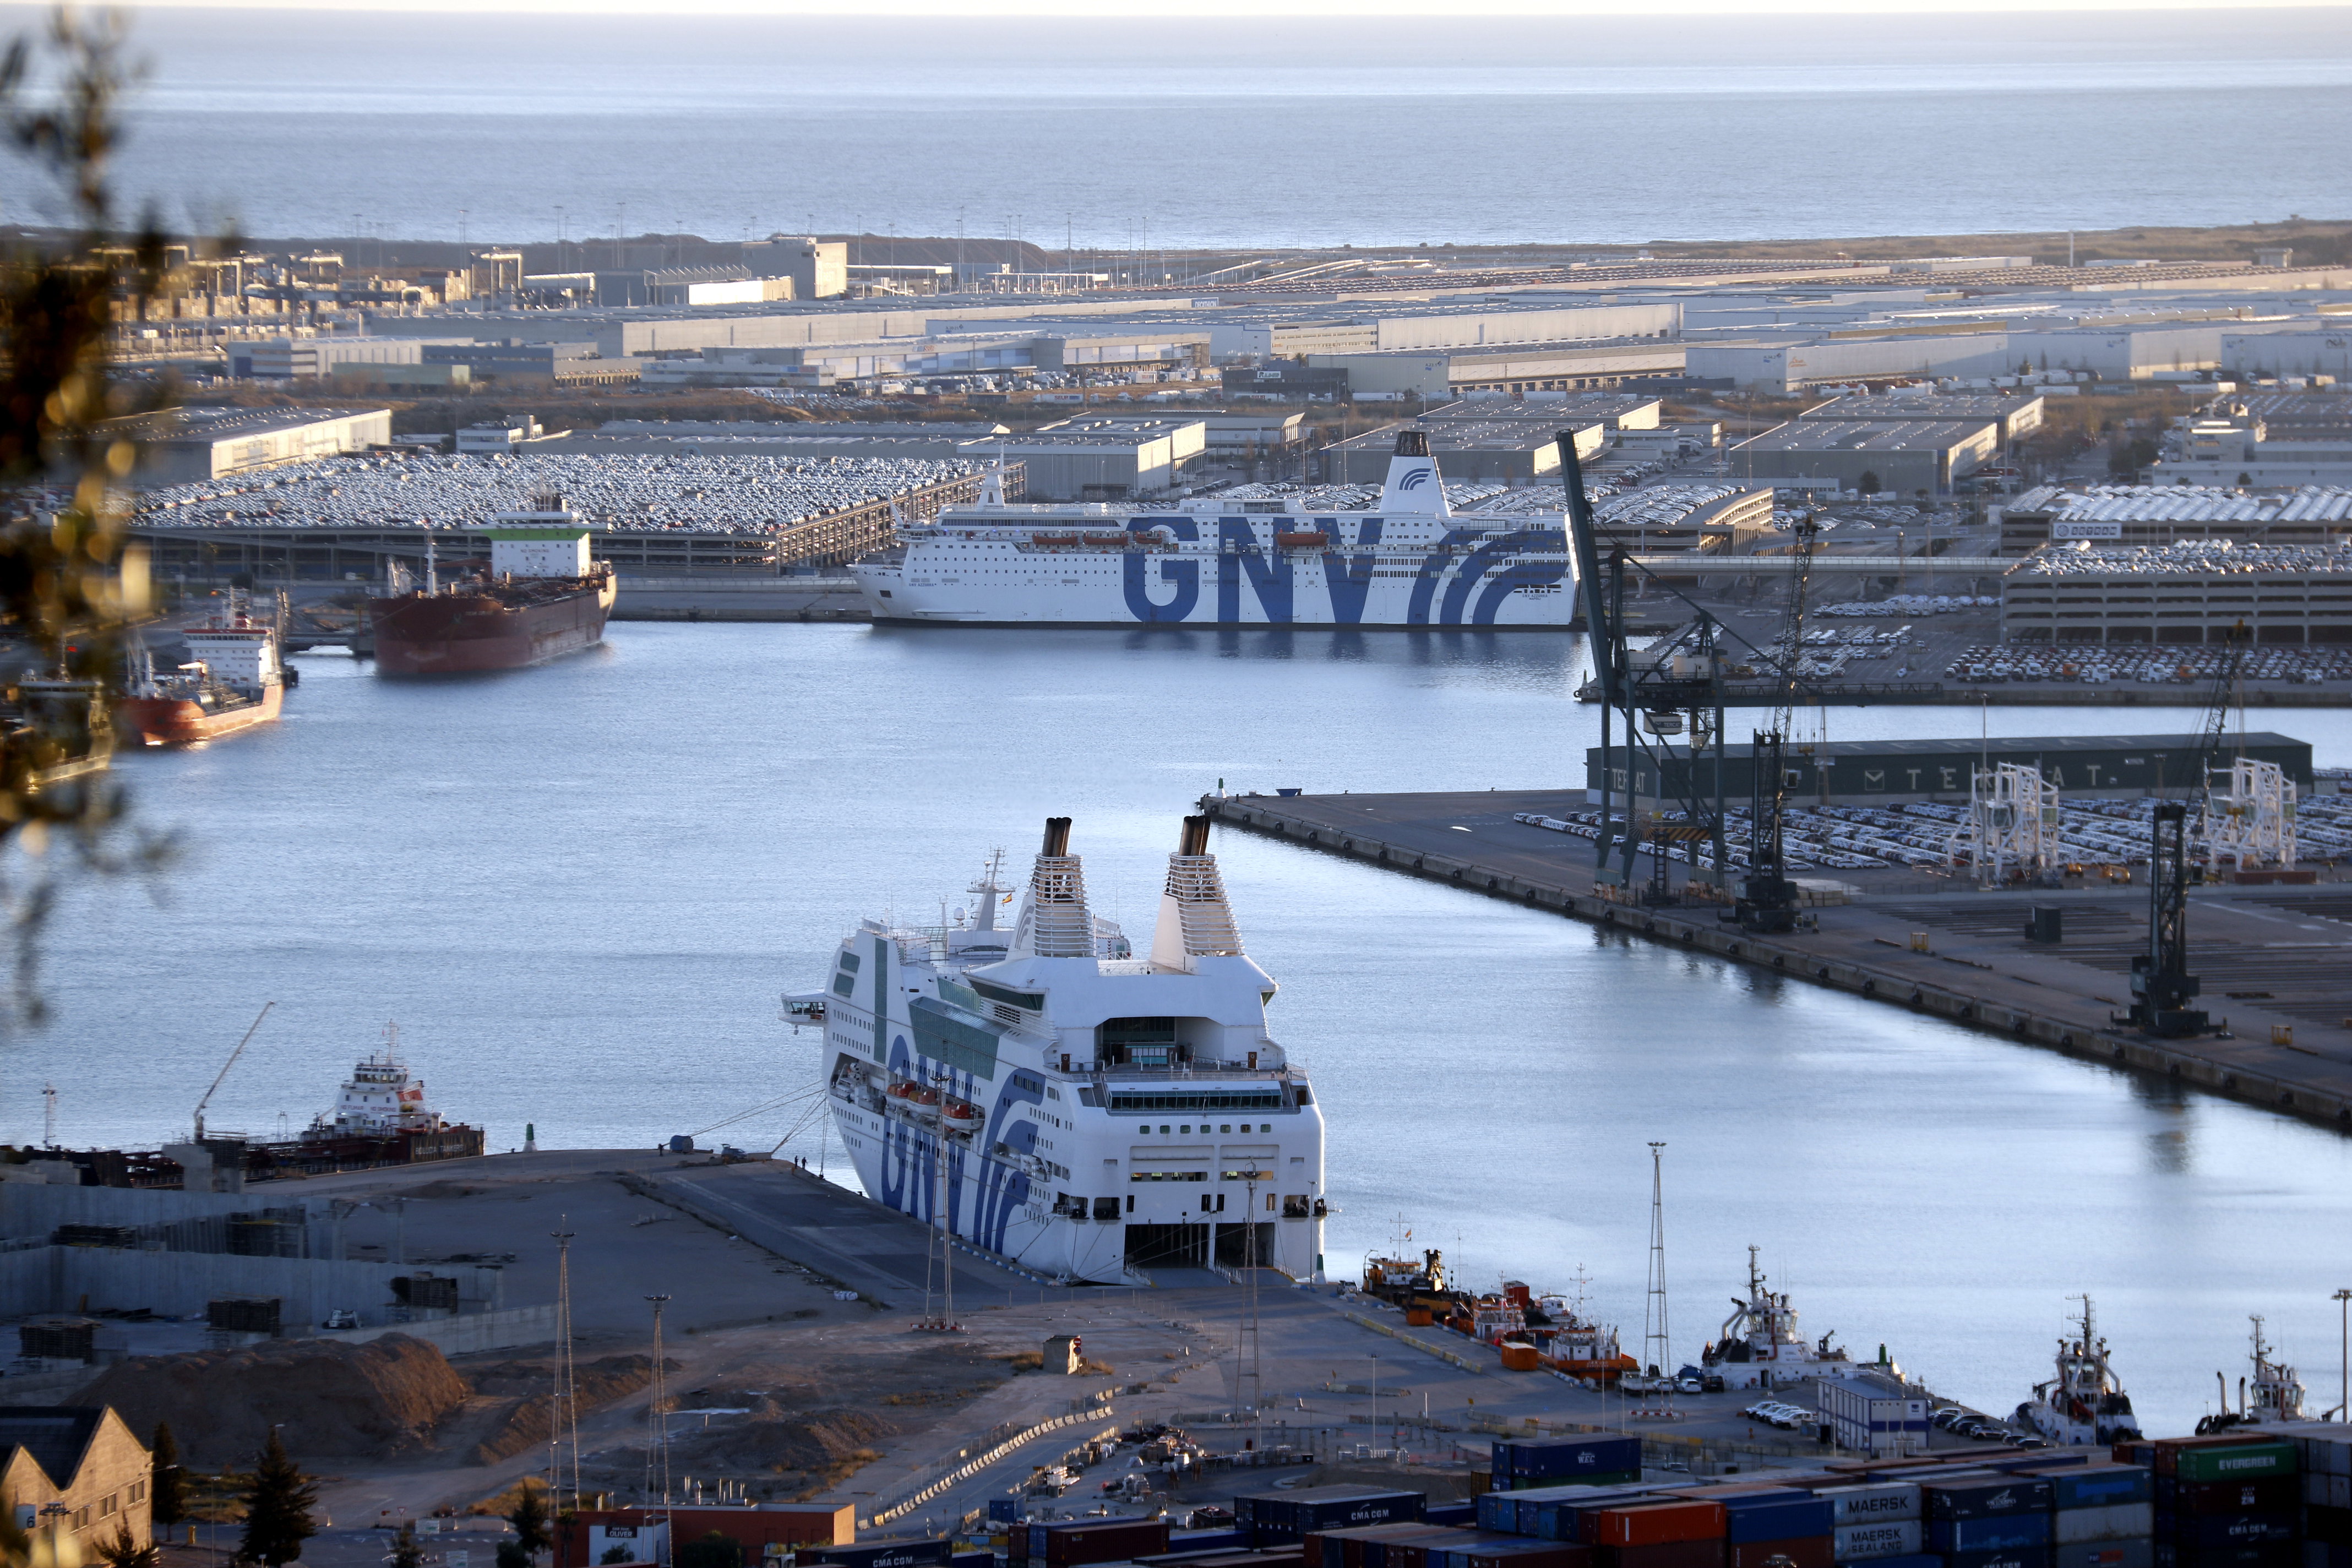 Ships GNV Azzurra and Rhapsody in the Port of Barcelona on December 30 2017 (by Laura Fíguls)